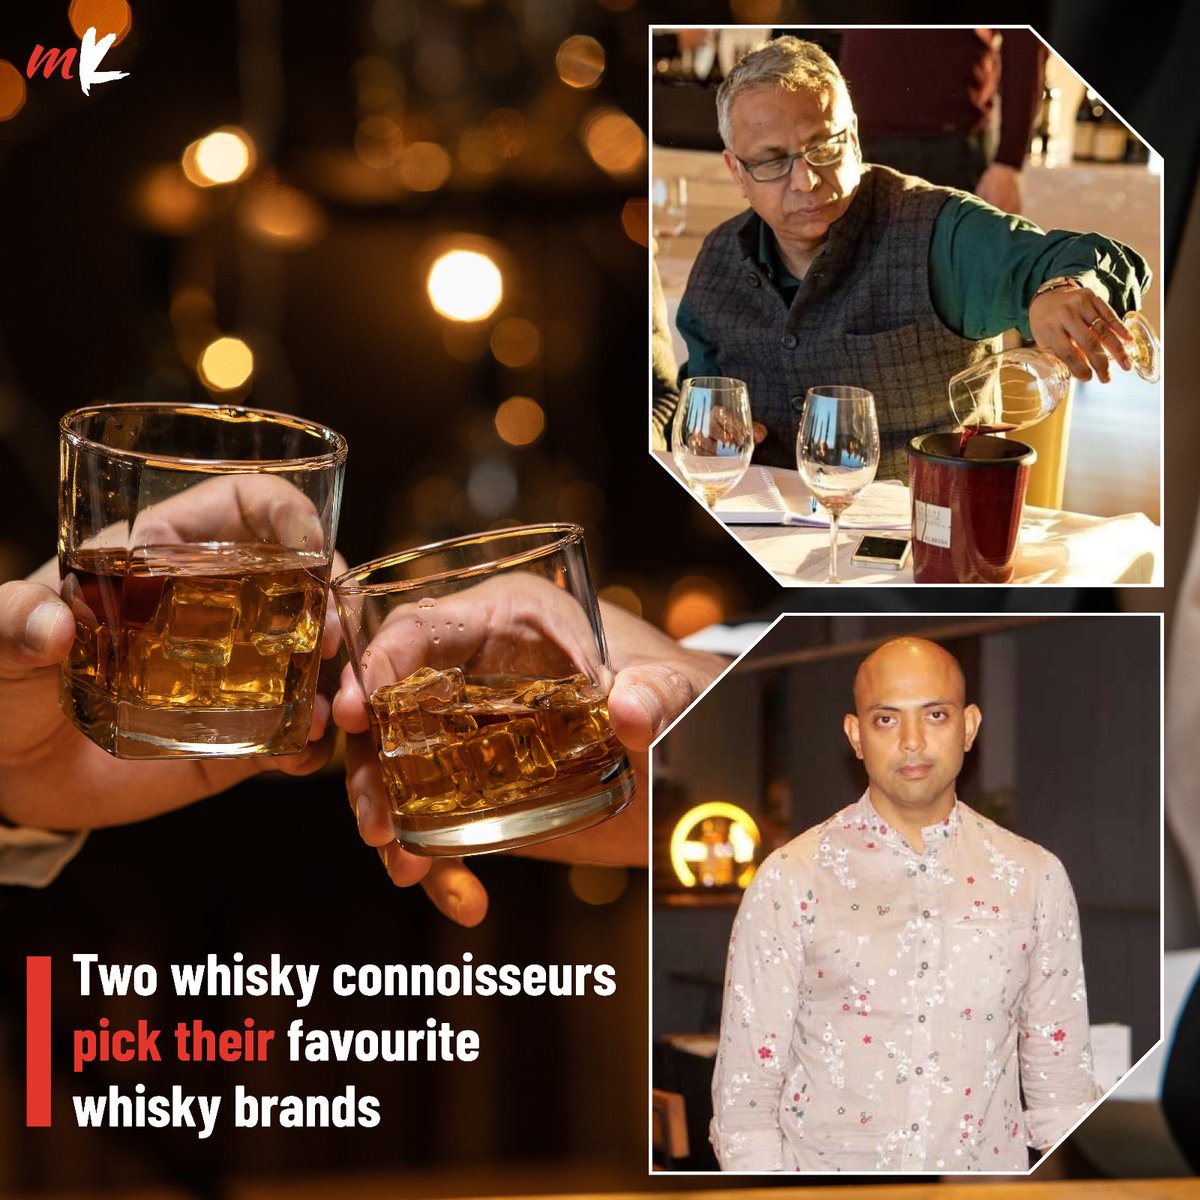 On World Whisky Day, two whisky connoisseurs speak about their favourite whisky brands and more. Know more here: telegraphindia.com/my-kolkata/foo… #WorldWhiskyDay #Cocktails #CocktailLovers #WeekendMood #Whisky #KolkataPubs #CalcuttaMaltAndSpiritsClub #TheDramClub #Kolkata #MyKolkata